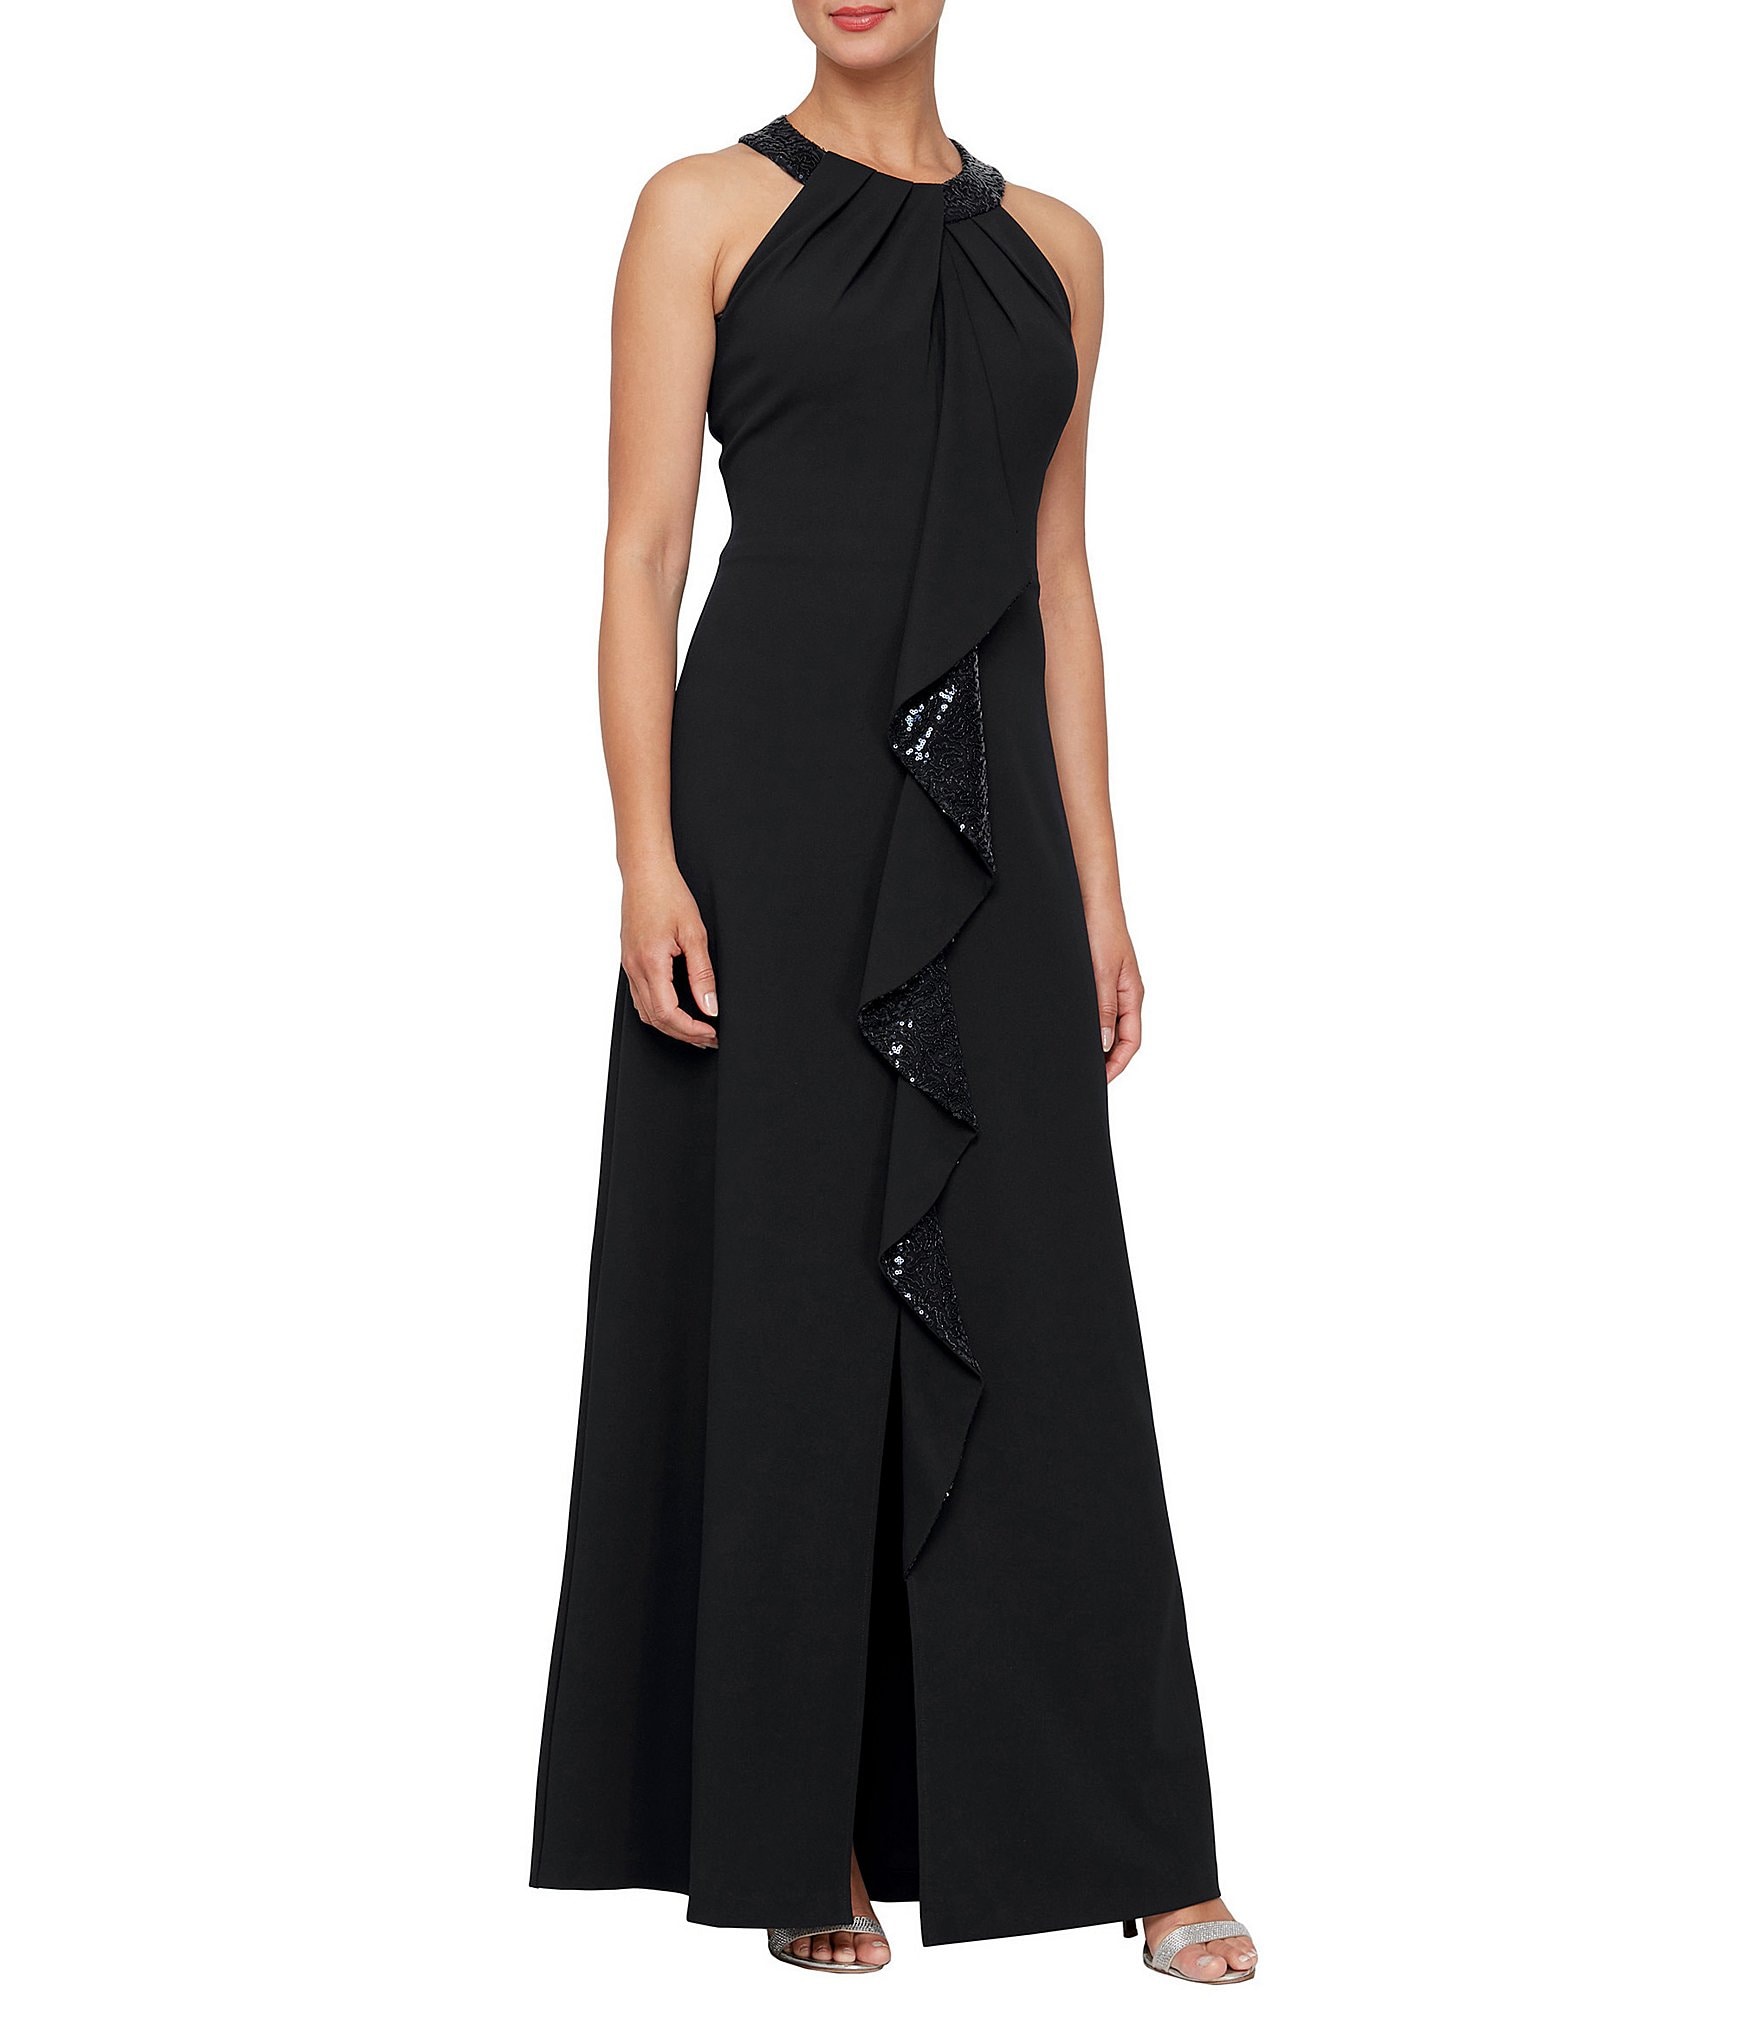 Vince Camuto Embellished Halter Gown - Macy's